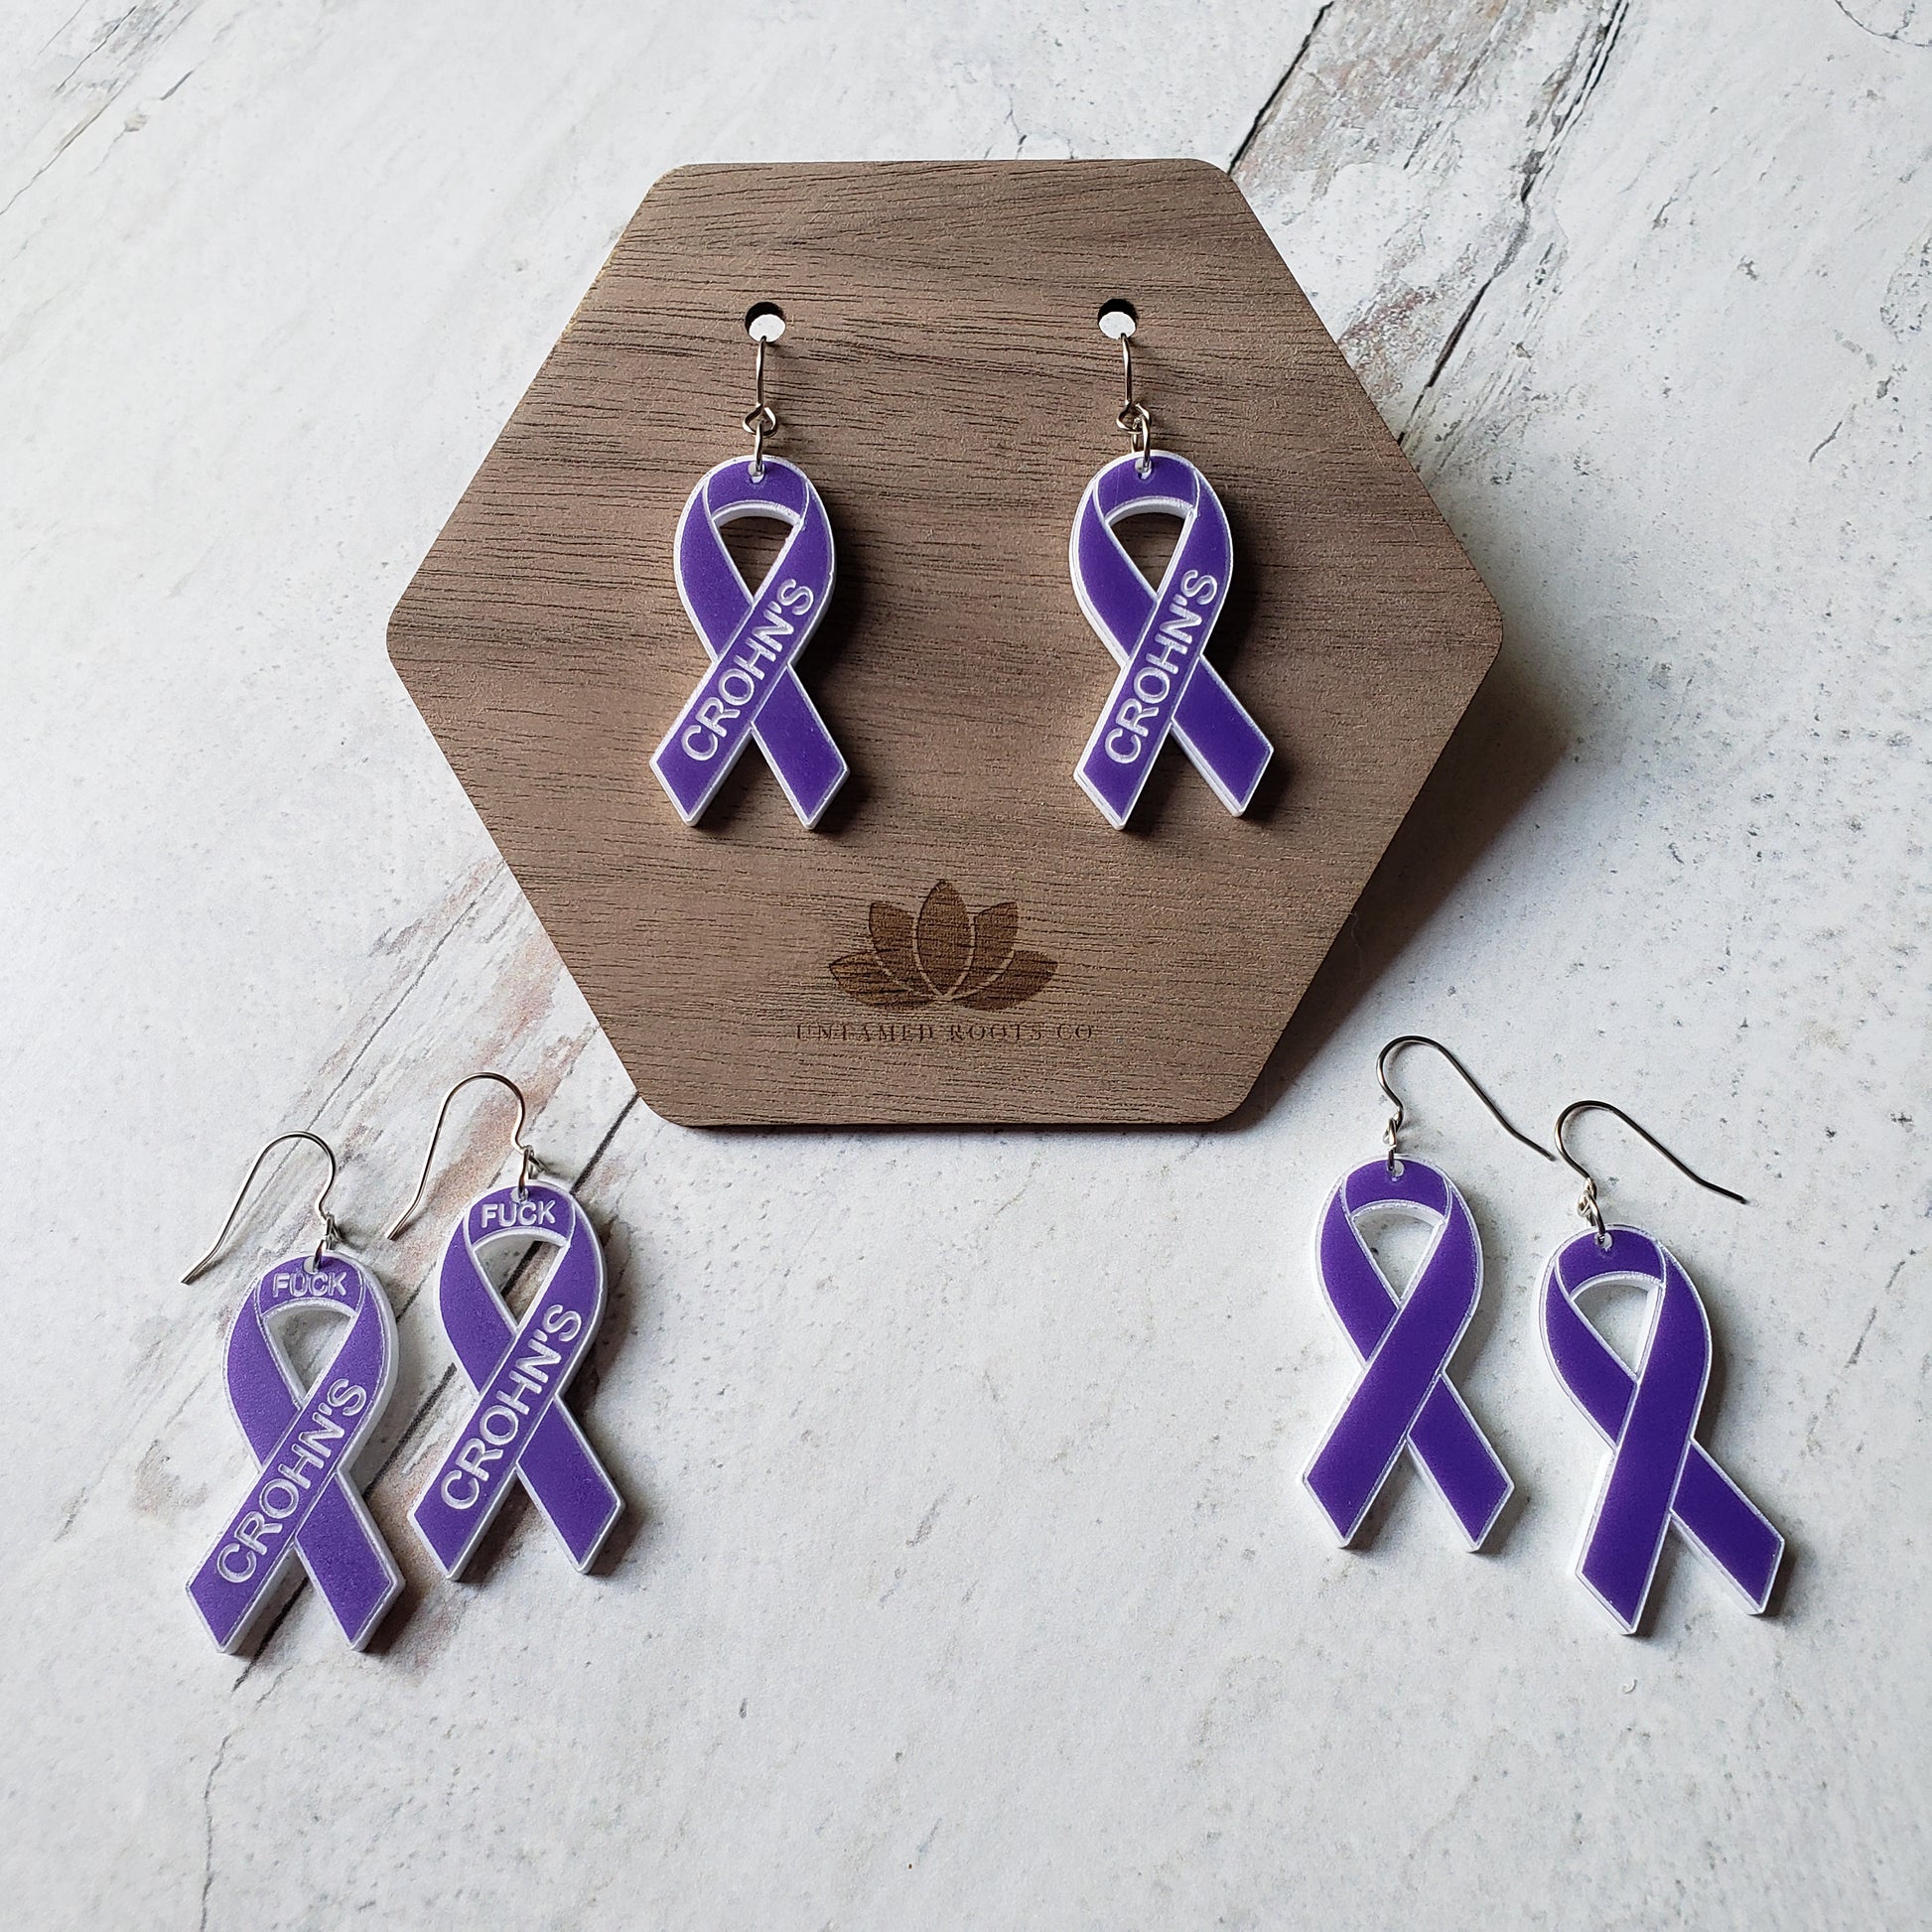 3 pairs of purple awareness ribbons, with engraving. Stainless steel earring wires.